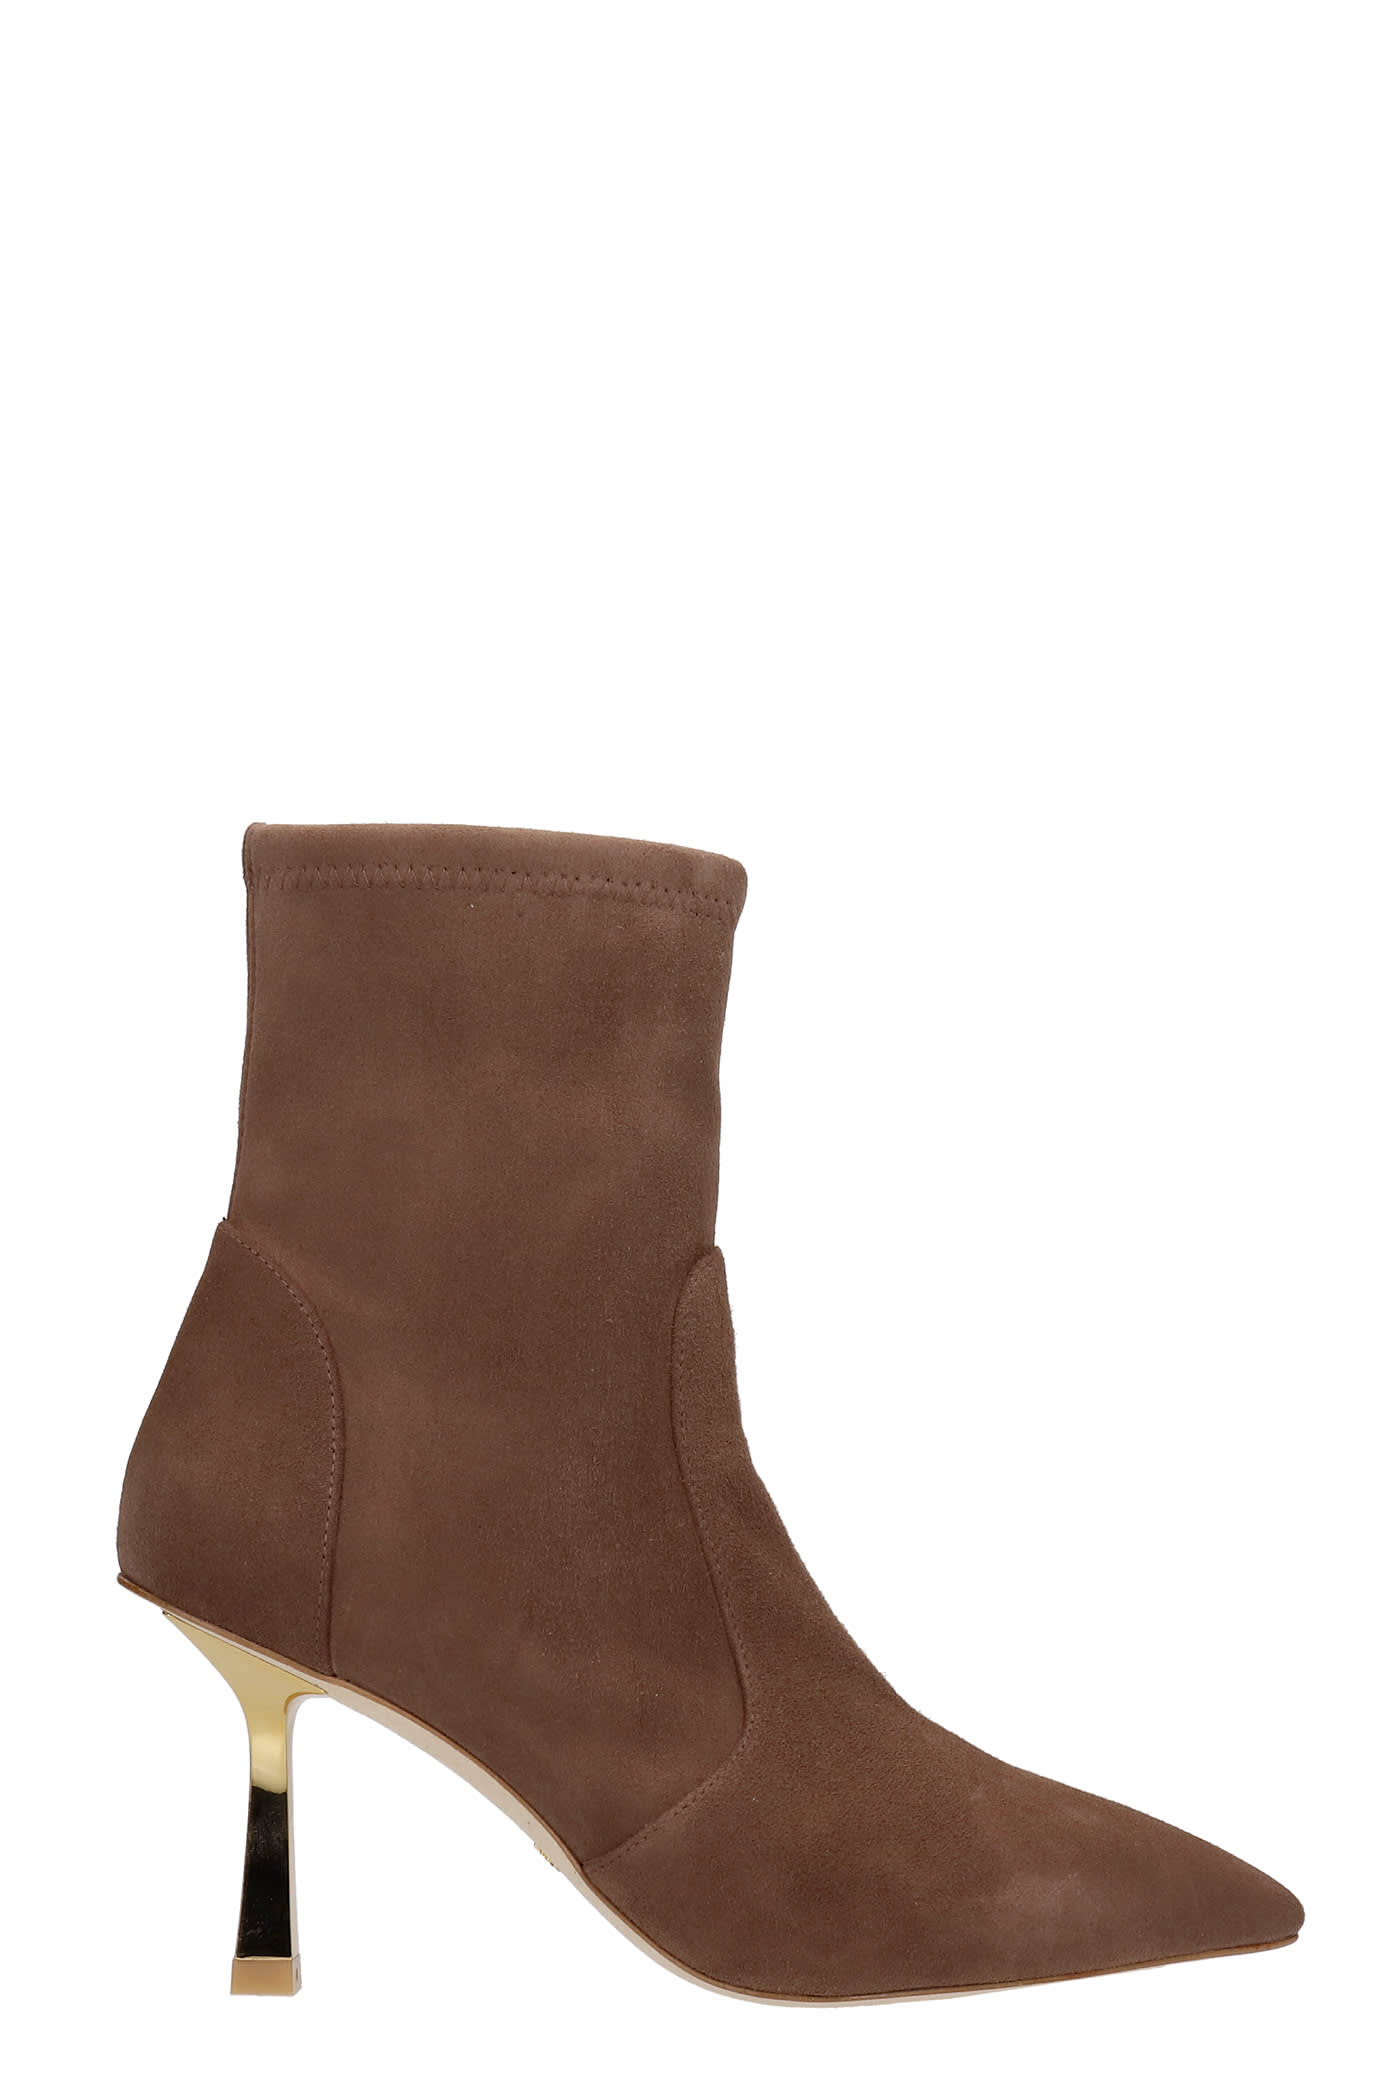 Buy Stuart Weitzman Max 85 High Heels Ankle Boots In Brown Suede online, shop Stuart Weitzman shoes with free shipping